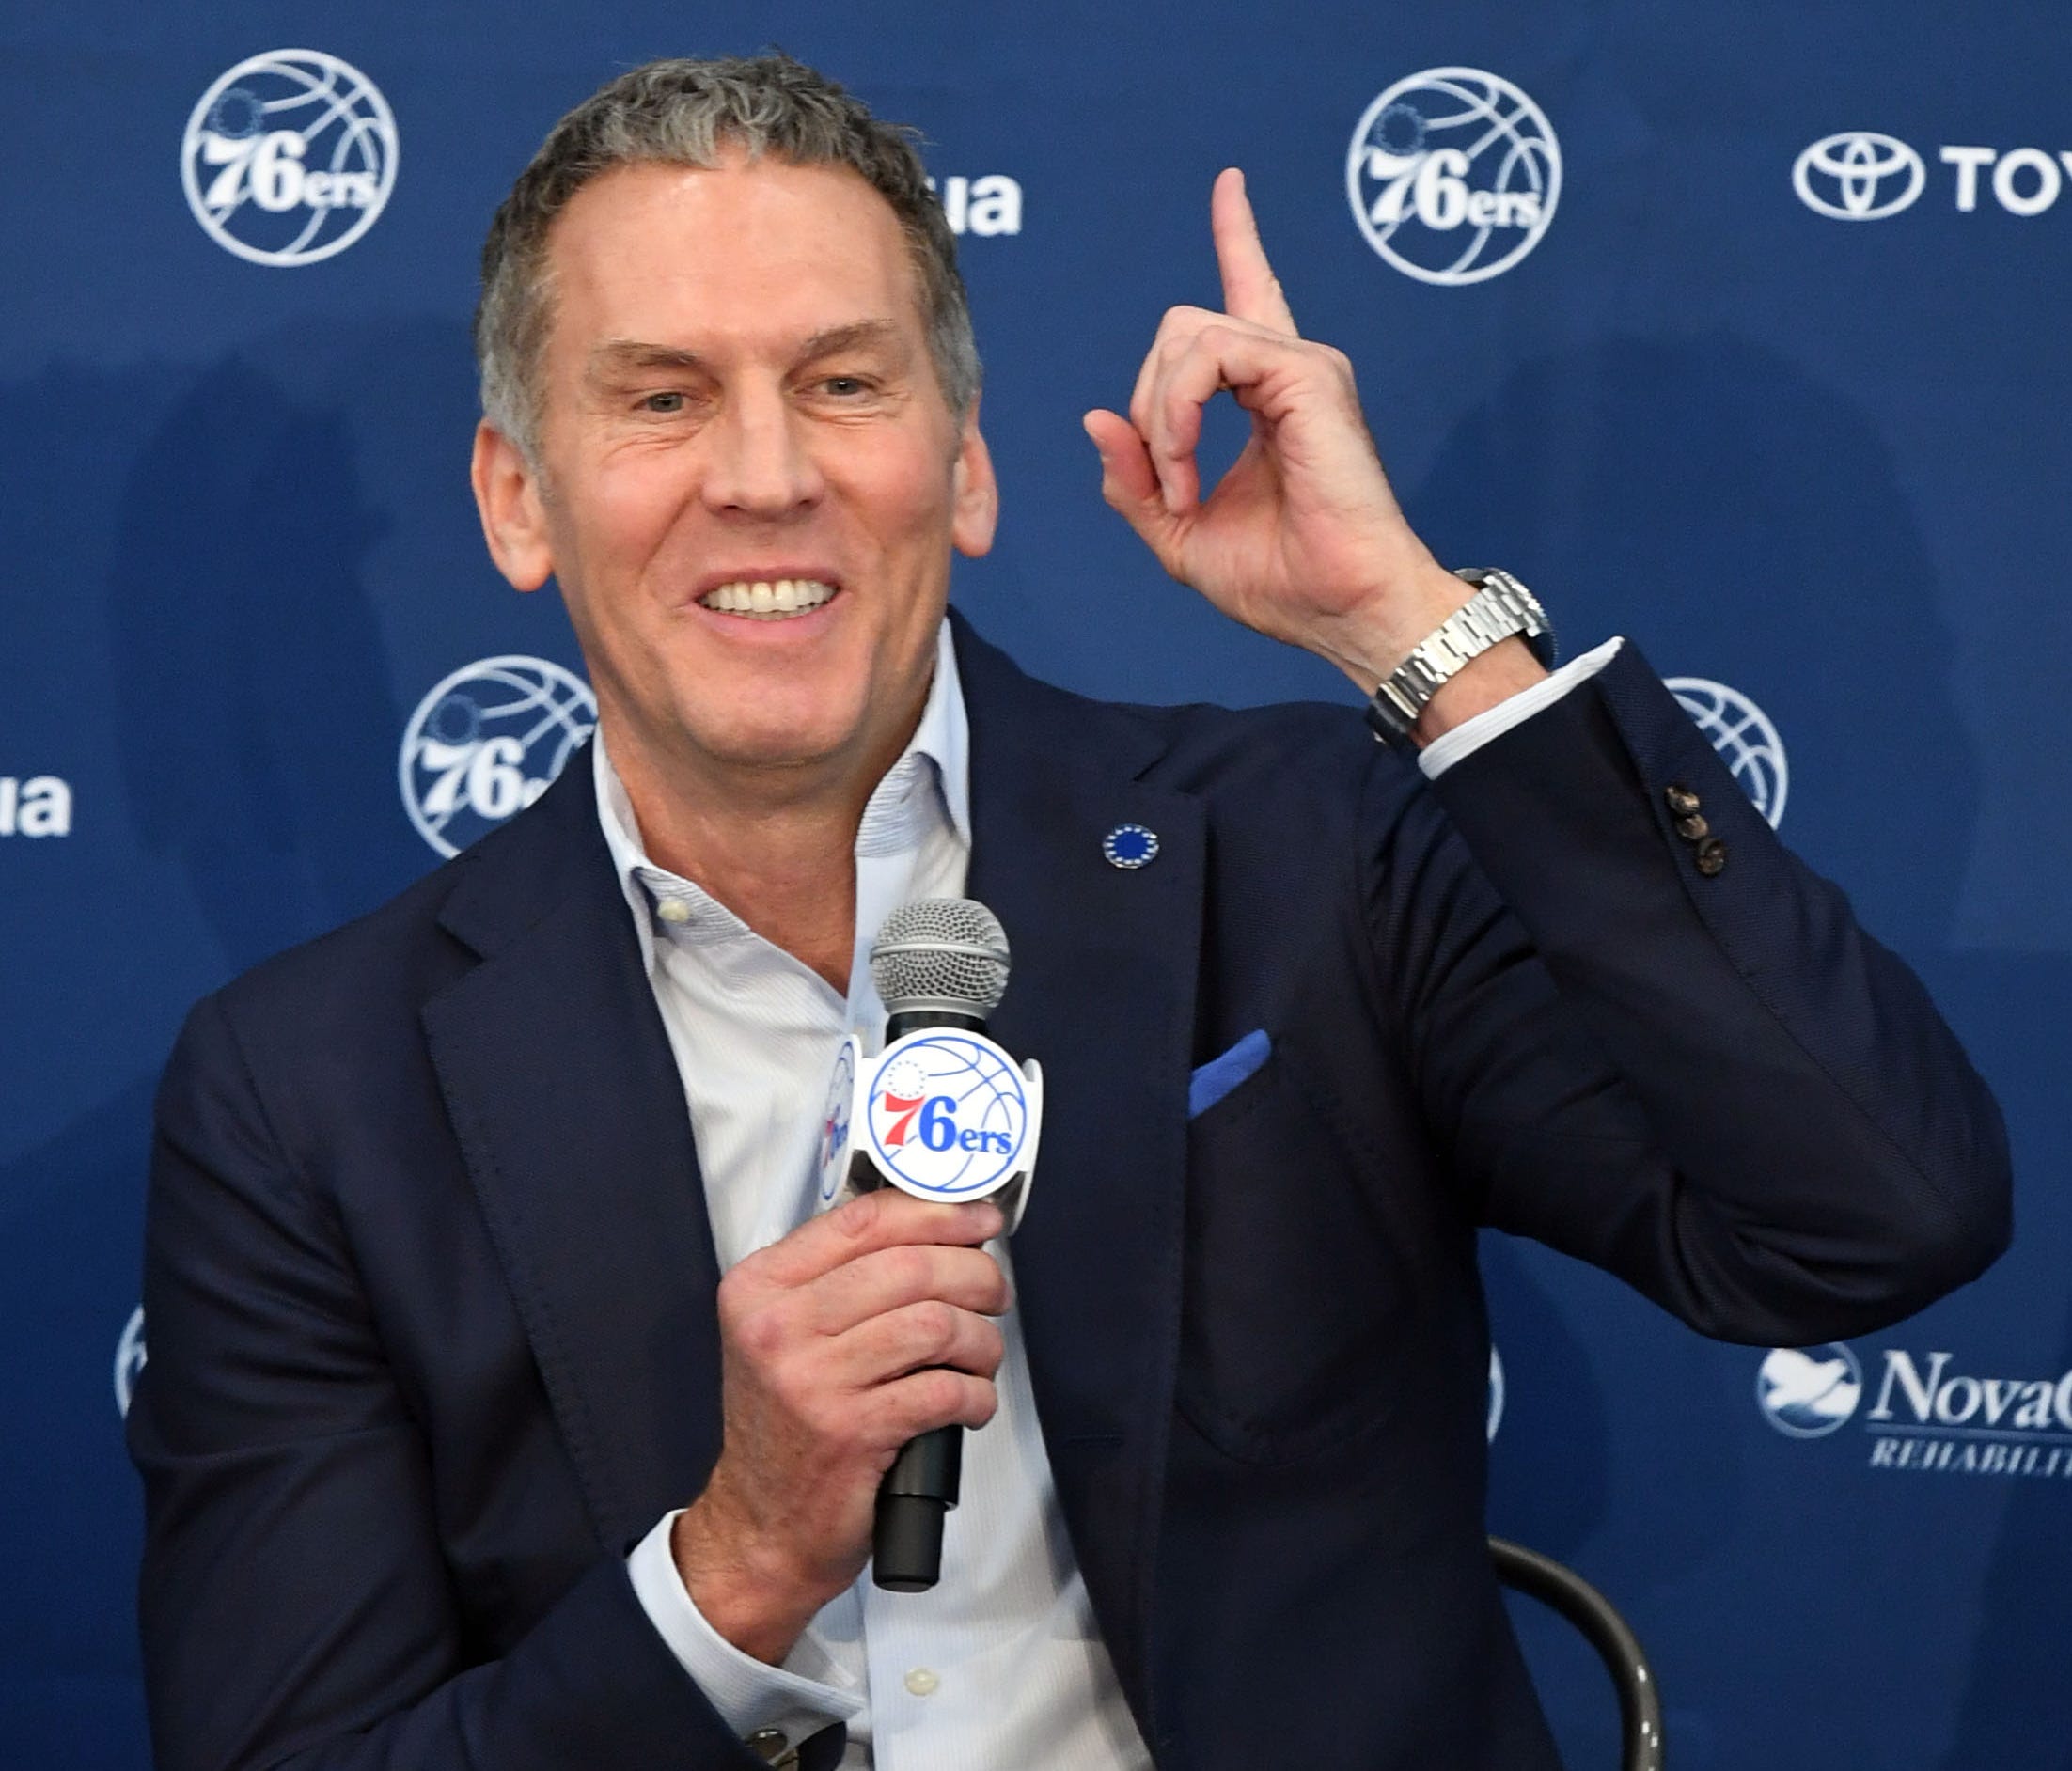 Bryan Colangelo is denying a report connecting the executive to Twitter accounts that criticized Sixers players.